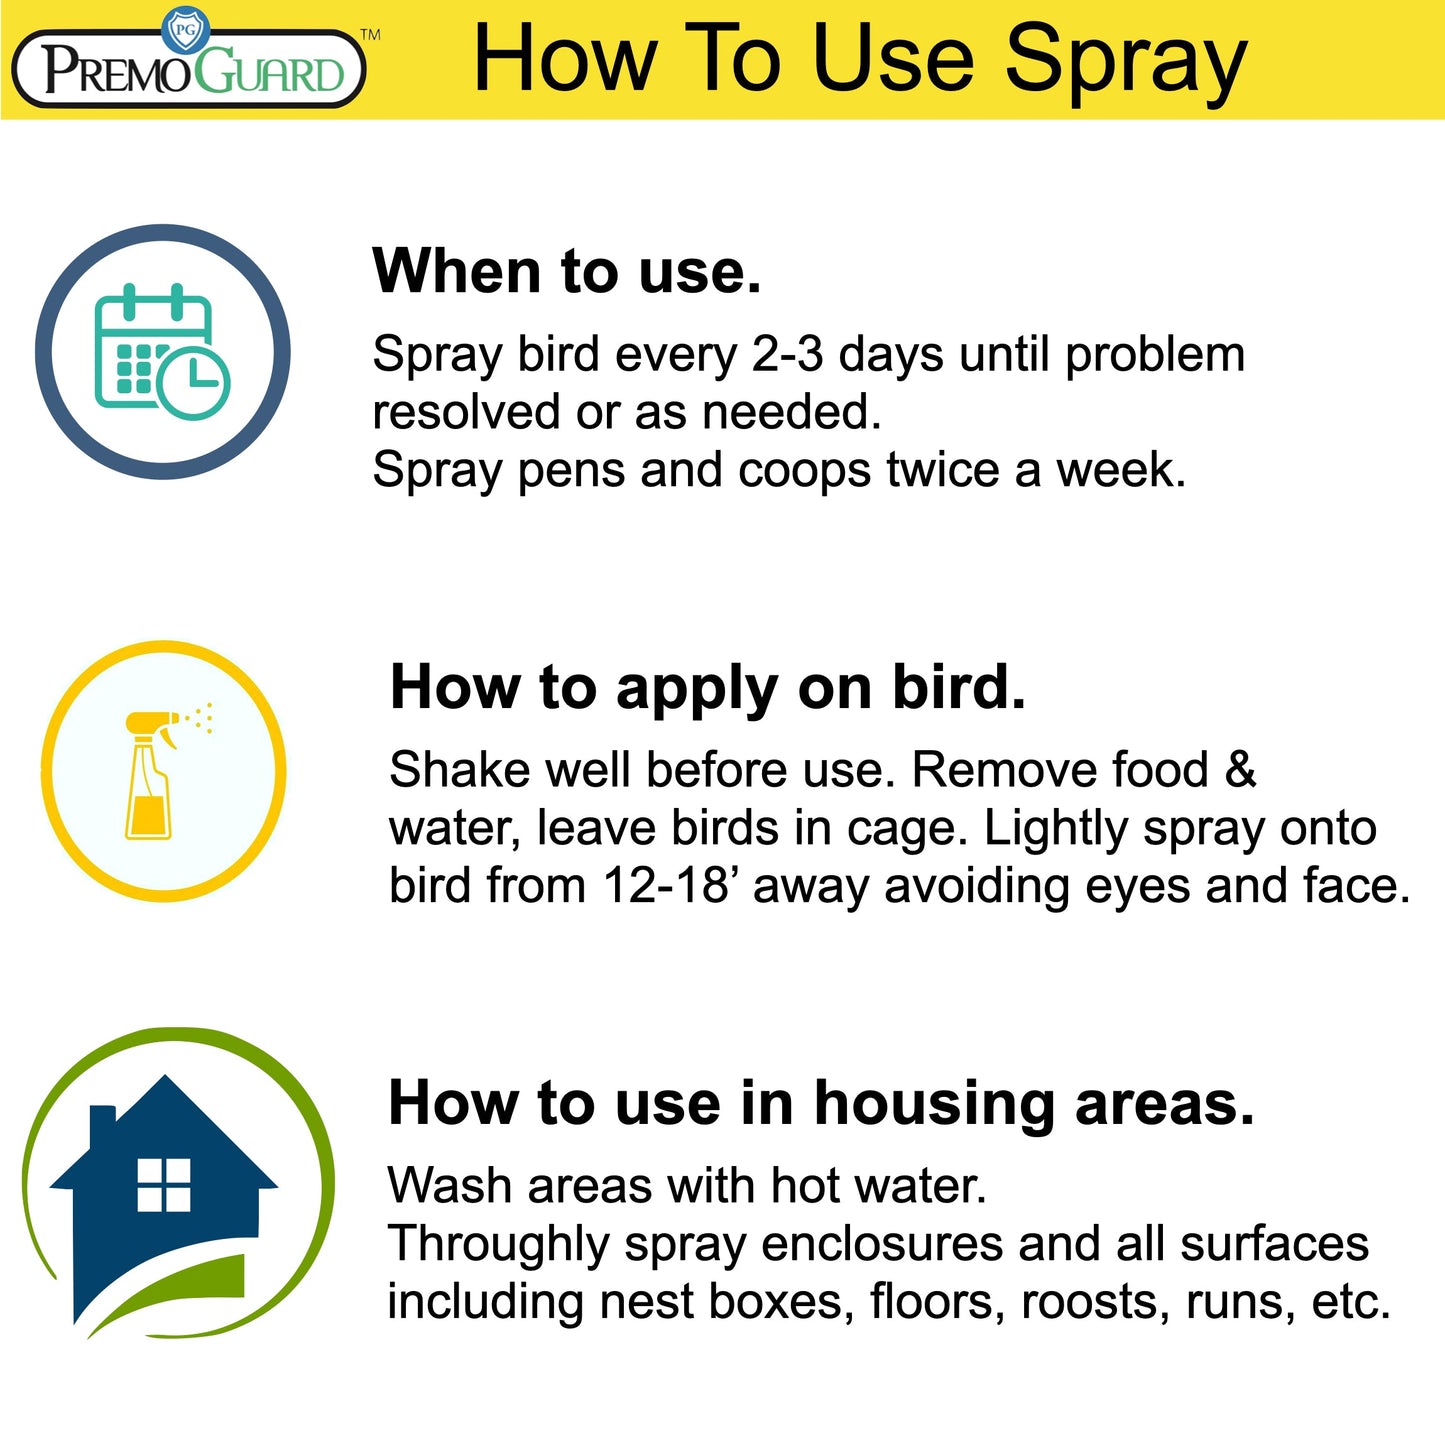 Premo Guard Poultry Spray is easy to use.